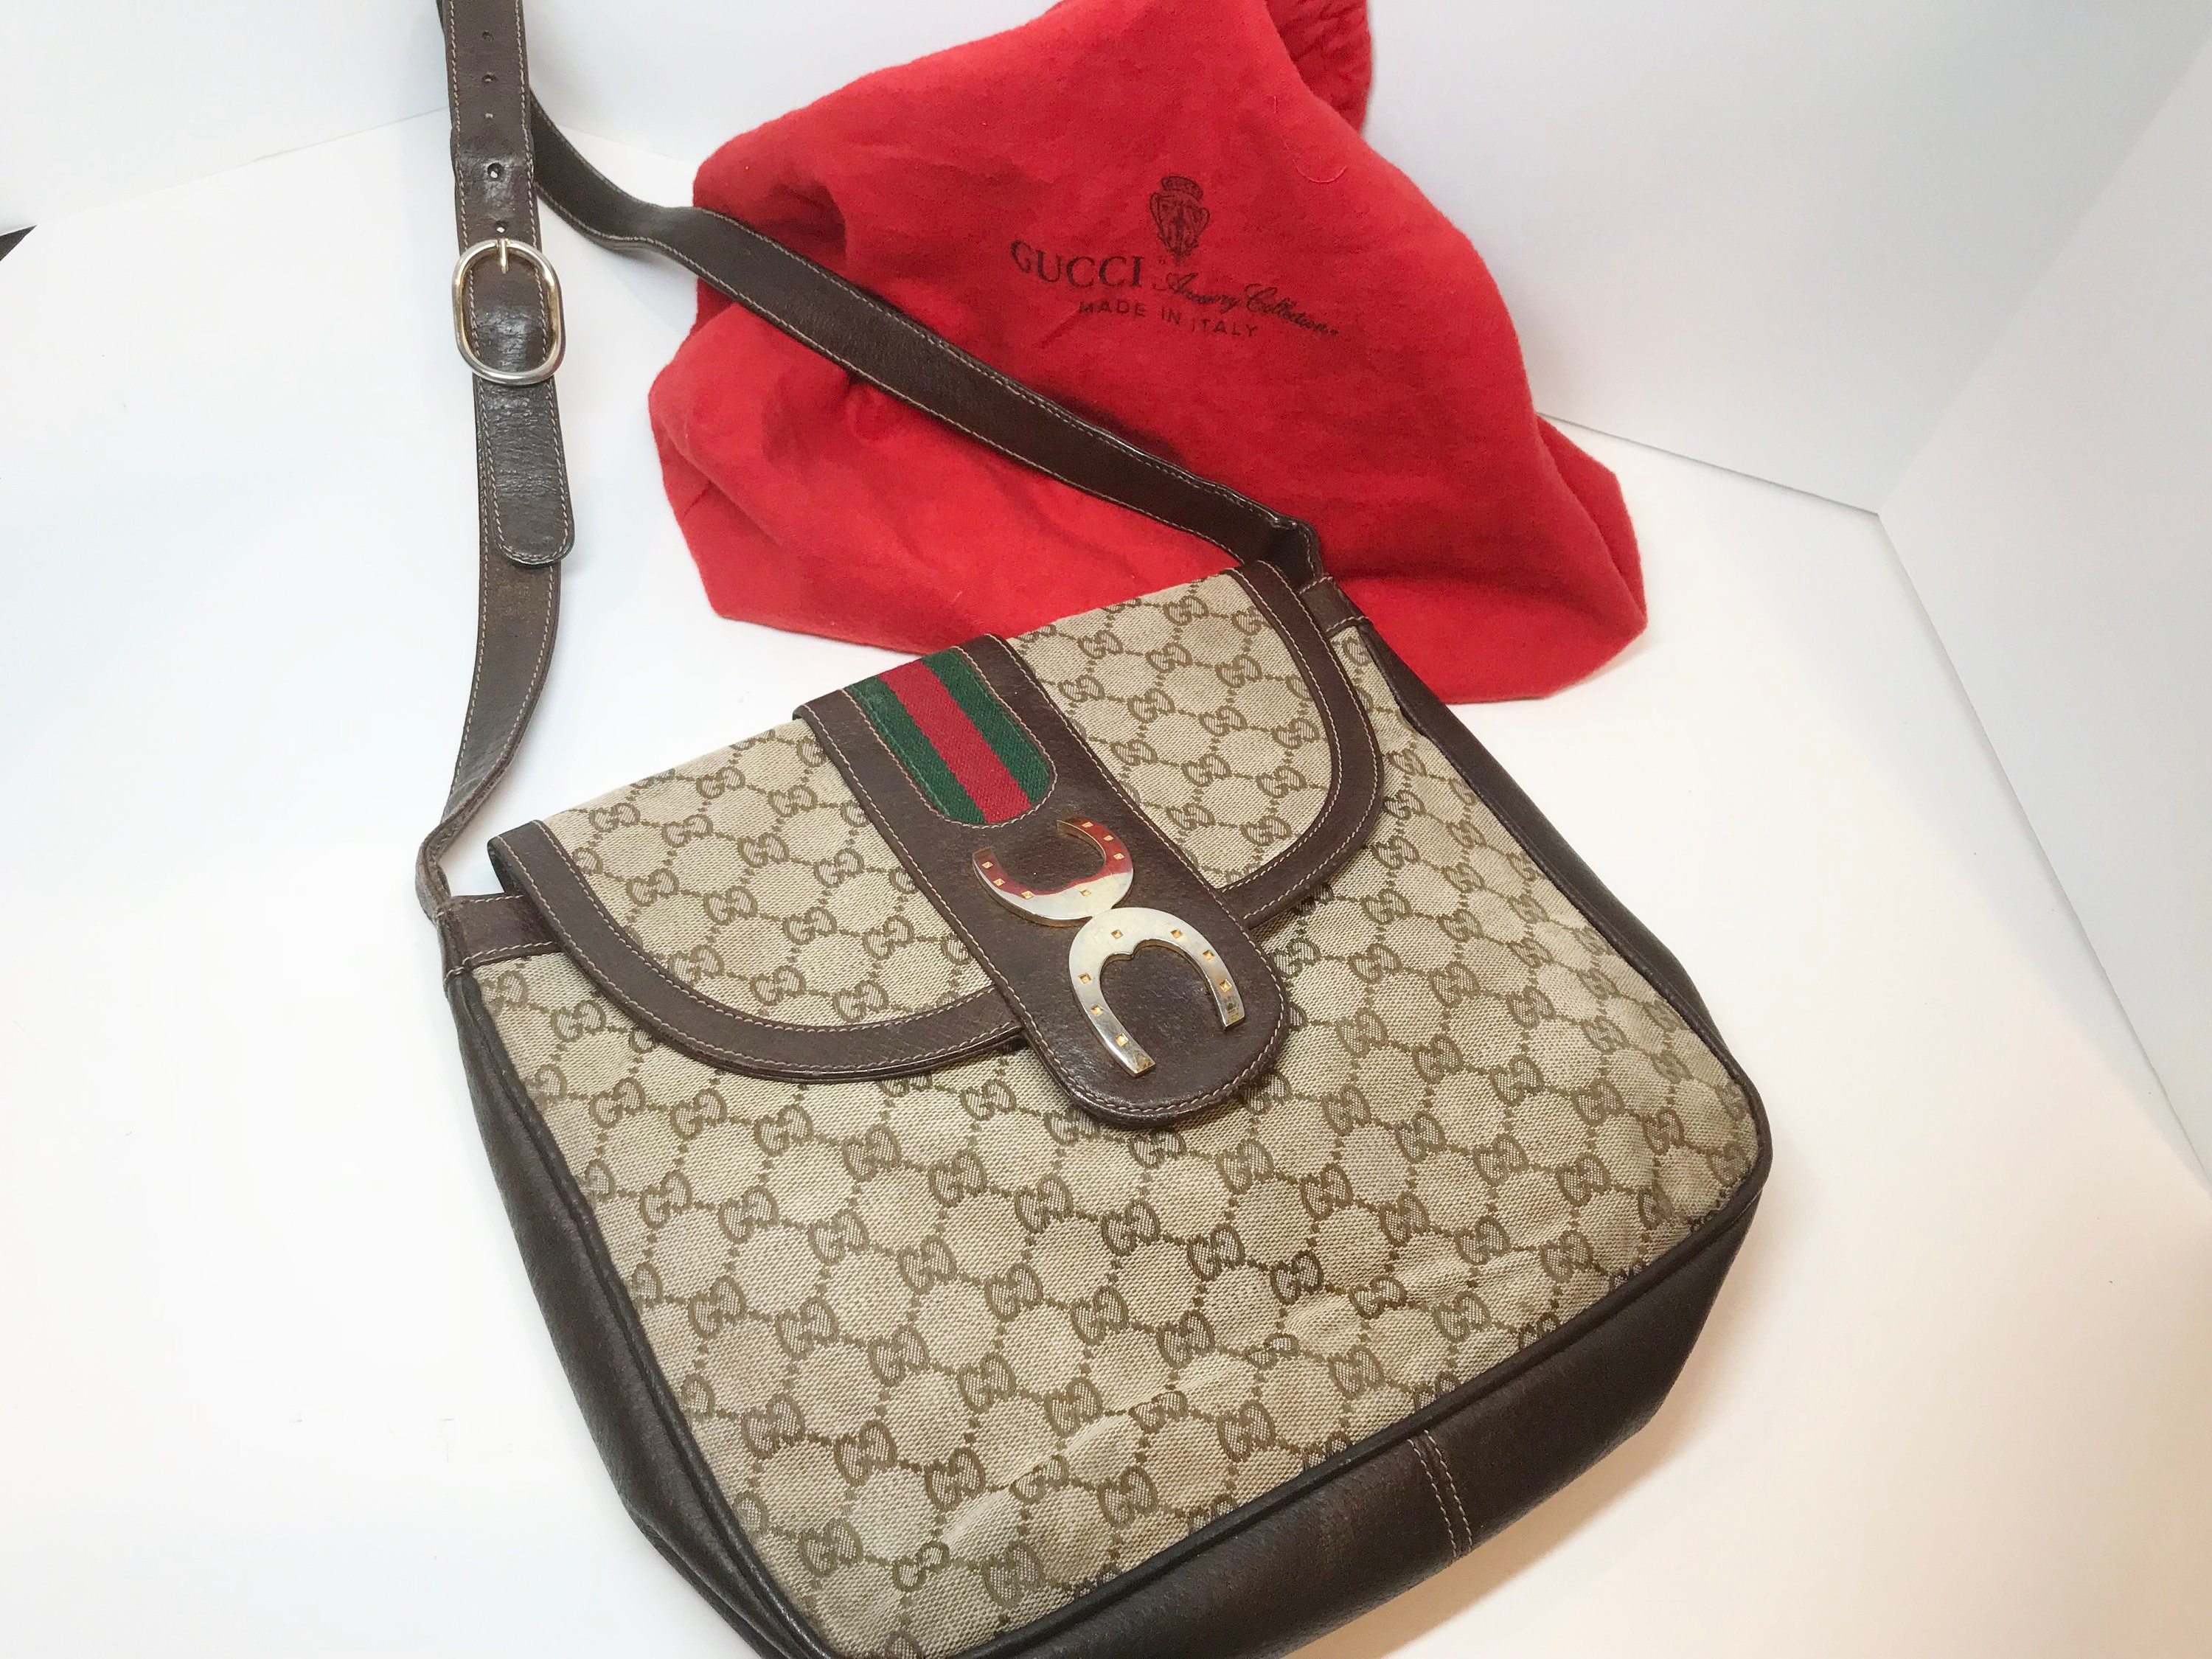 Classic Gucci Tote Bag - Vintage Collection